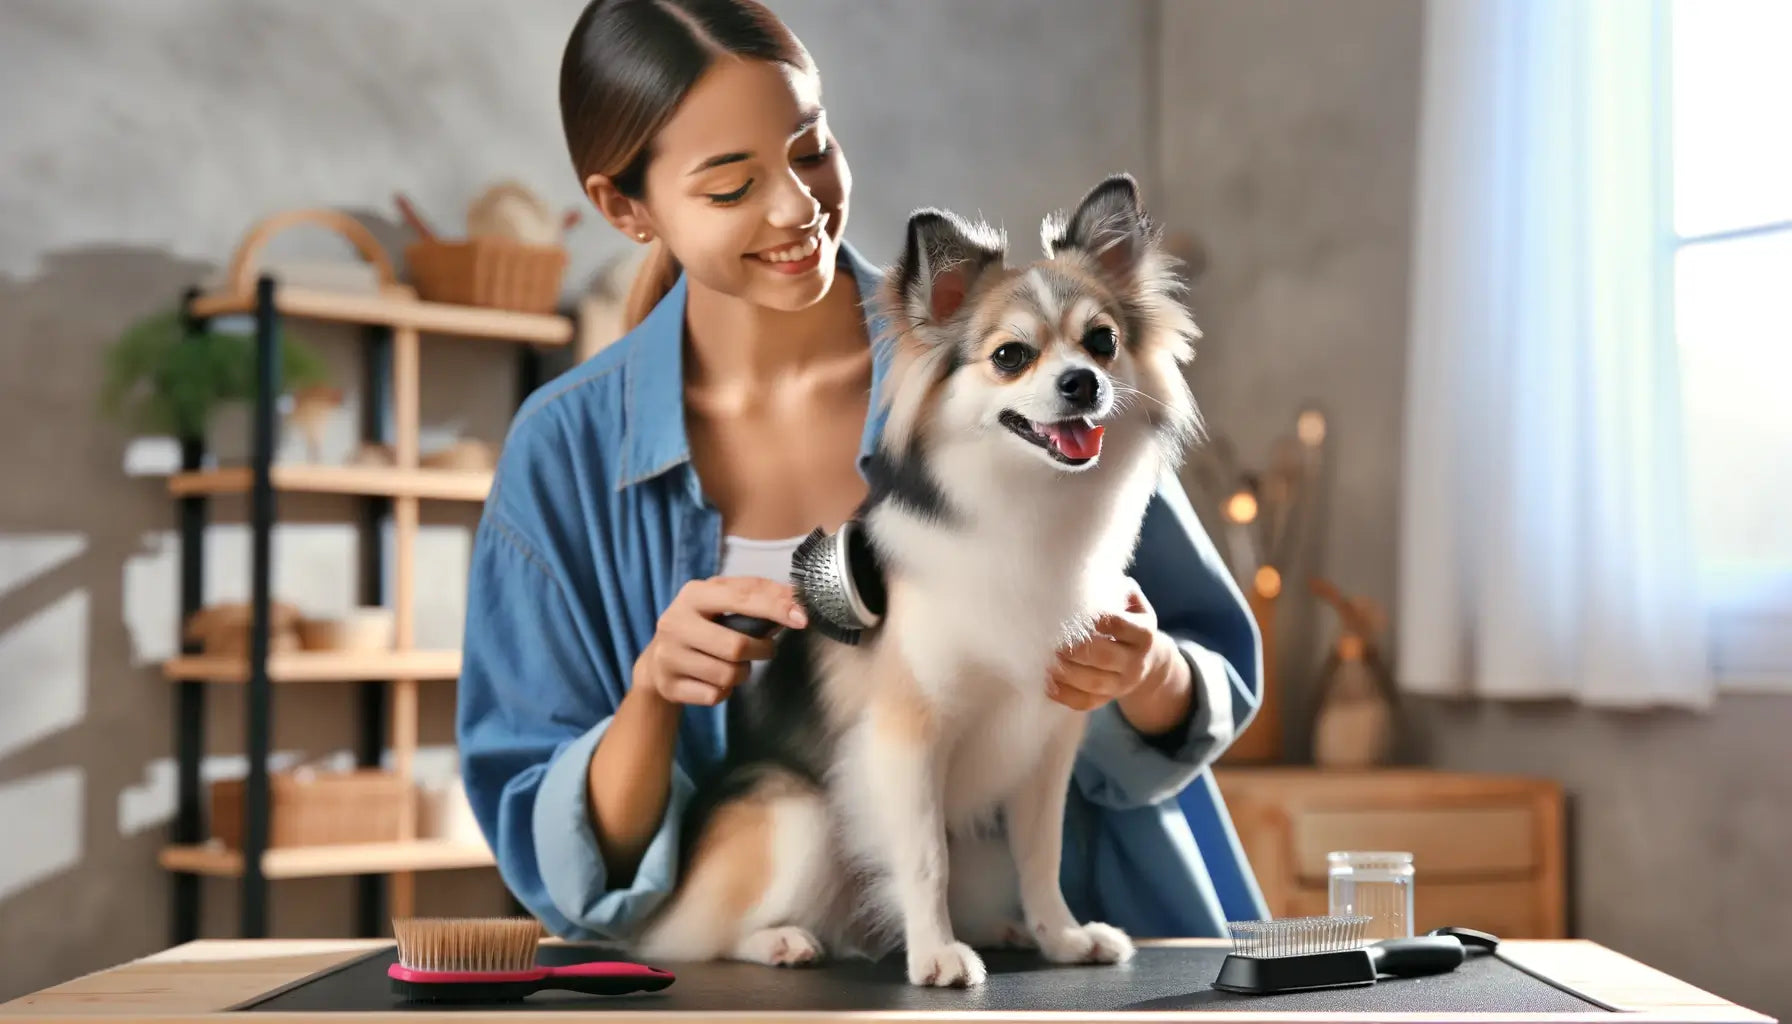 A Chihuahua Husky Mix enjoying a grooming session at home with its owner, emphasizing the bonding experience.